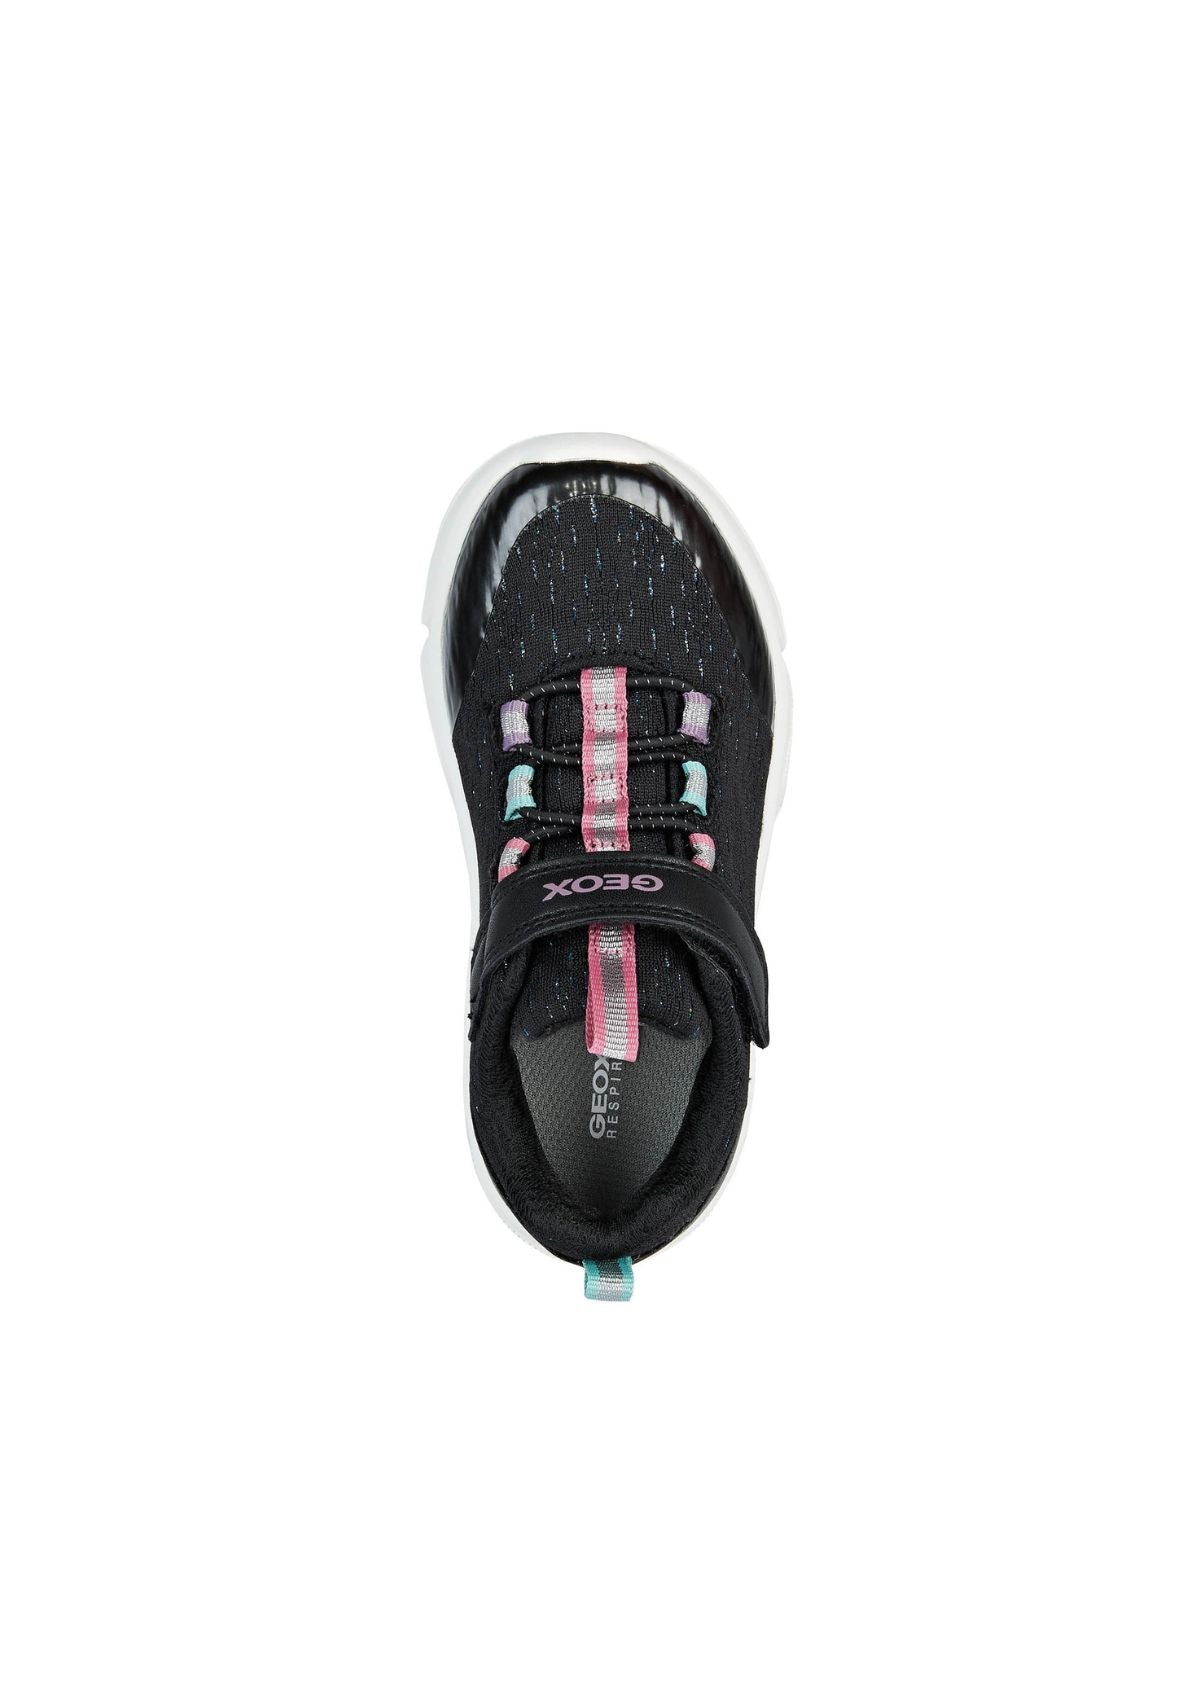 Geox Girls Trainers ARIL Black Multicolour up